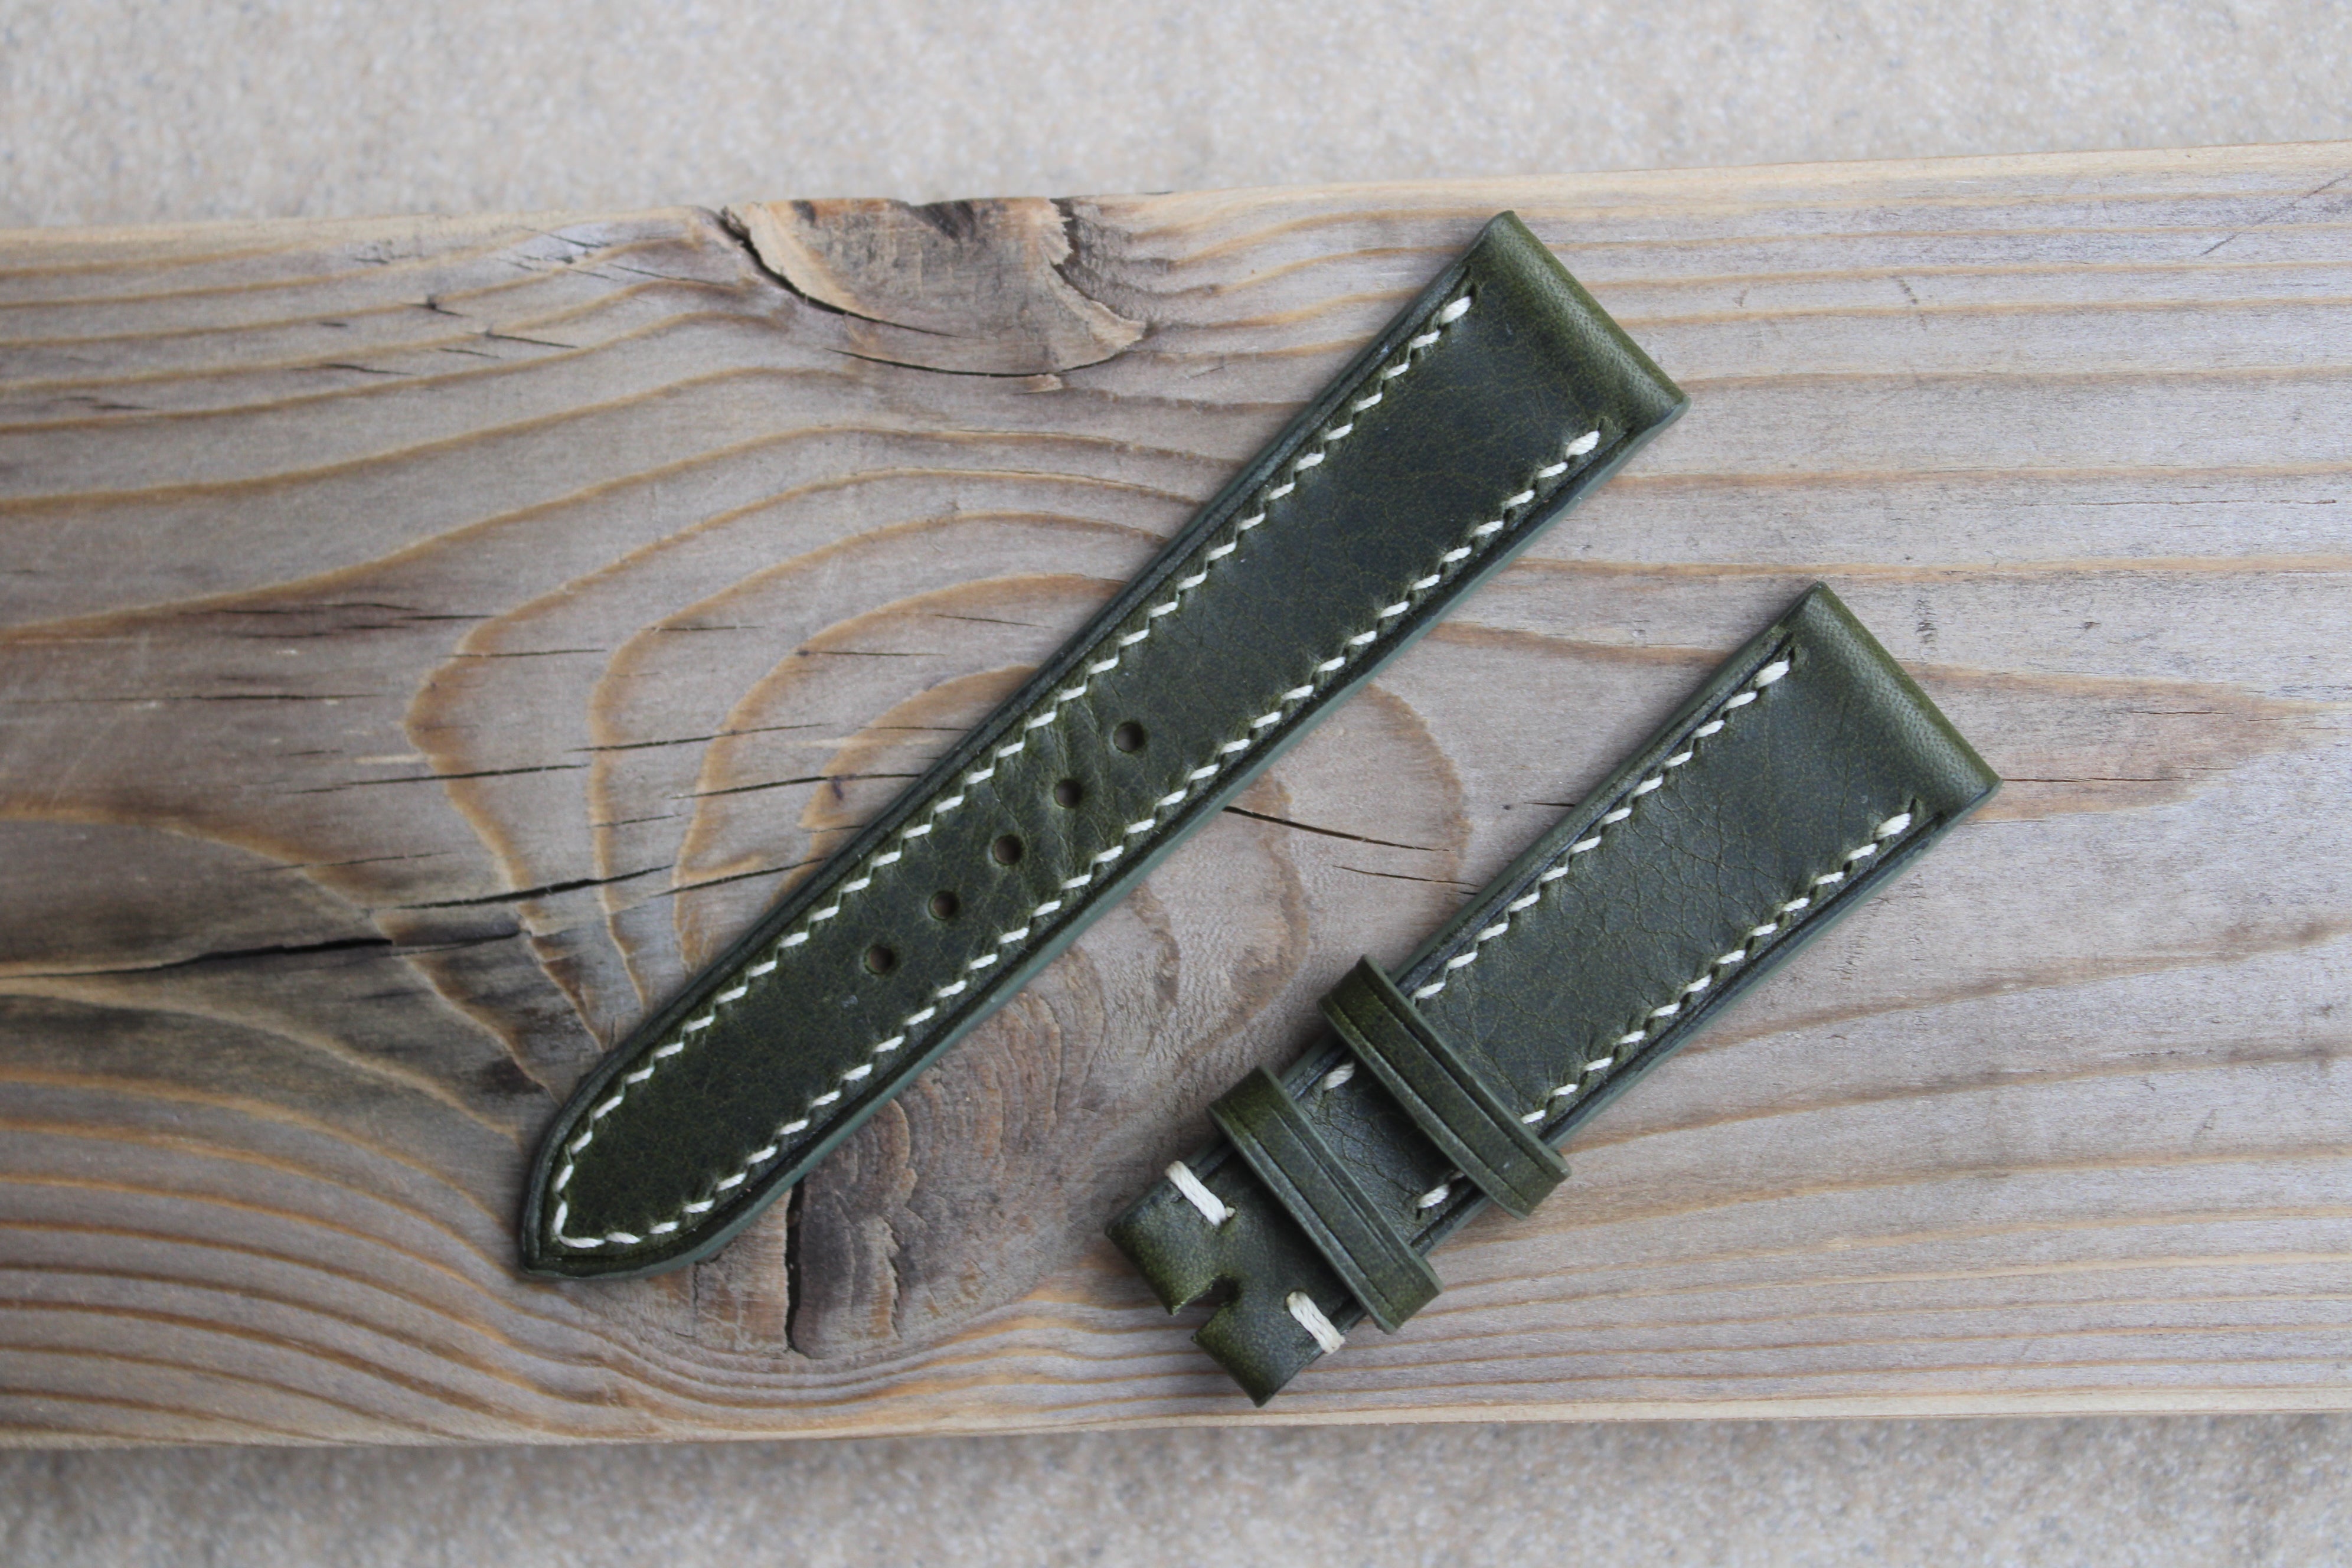 Italian Waxy Calf Leather Strap in Olive - Artisan Straps